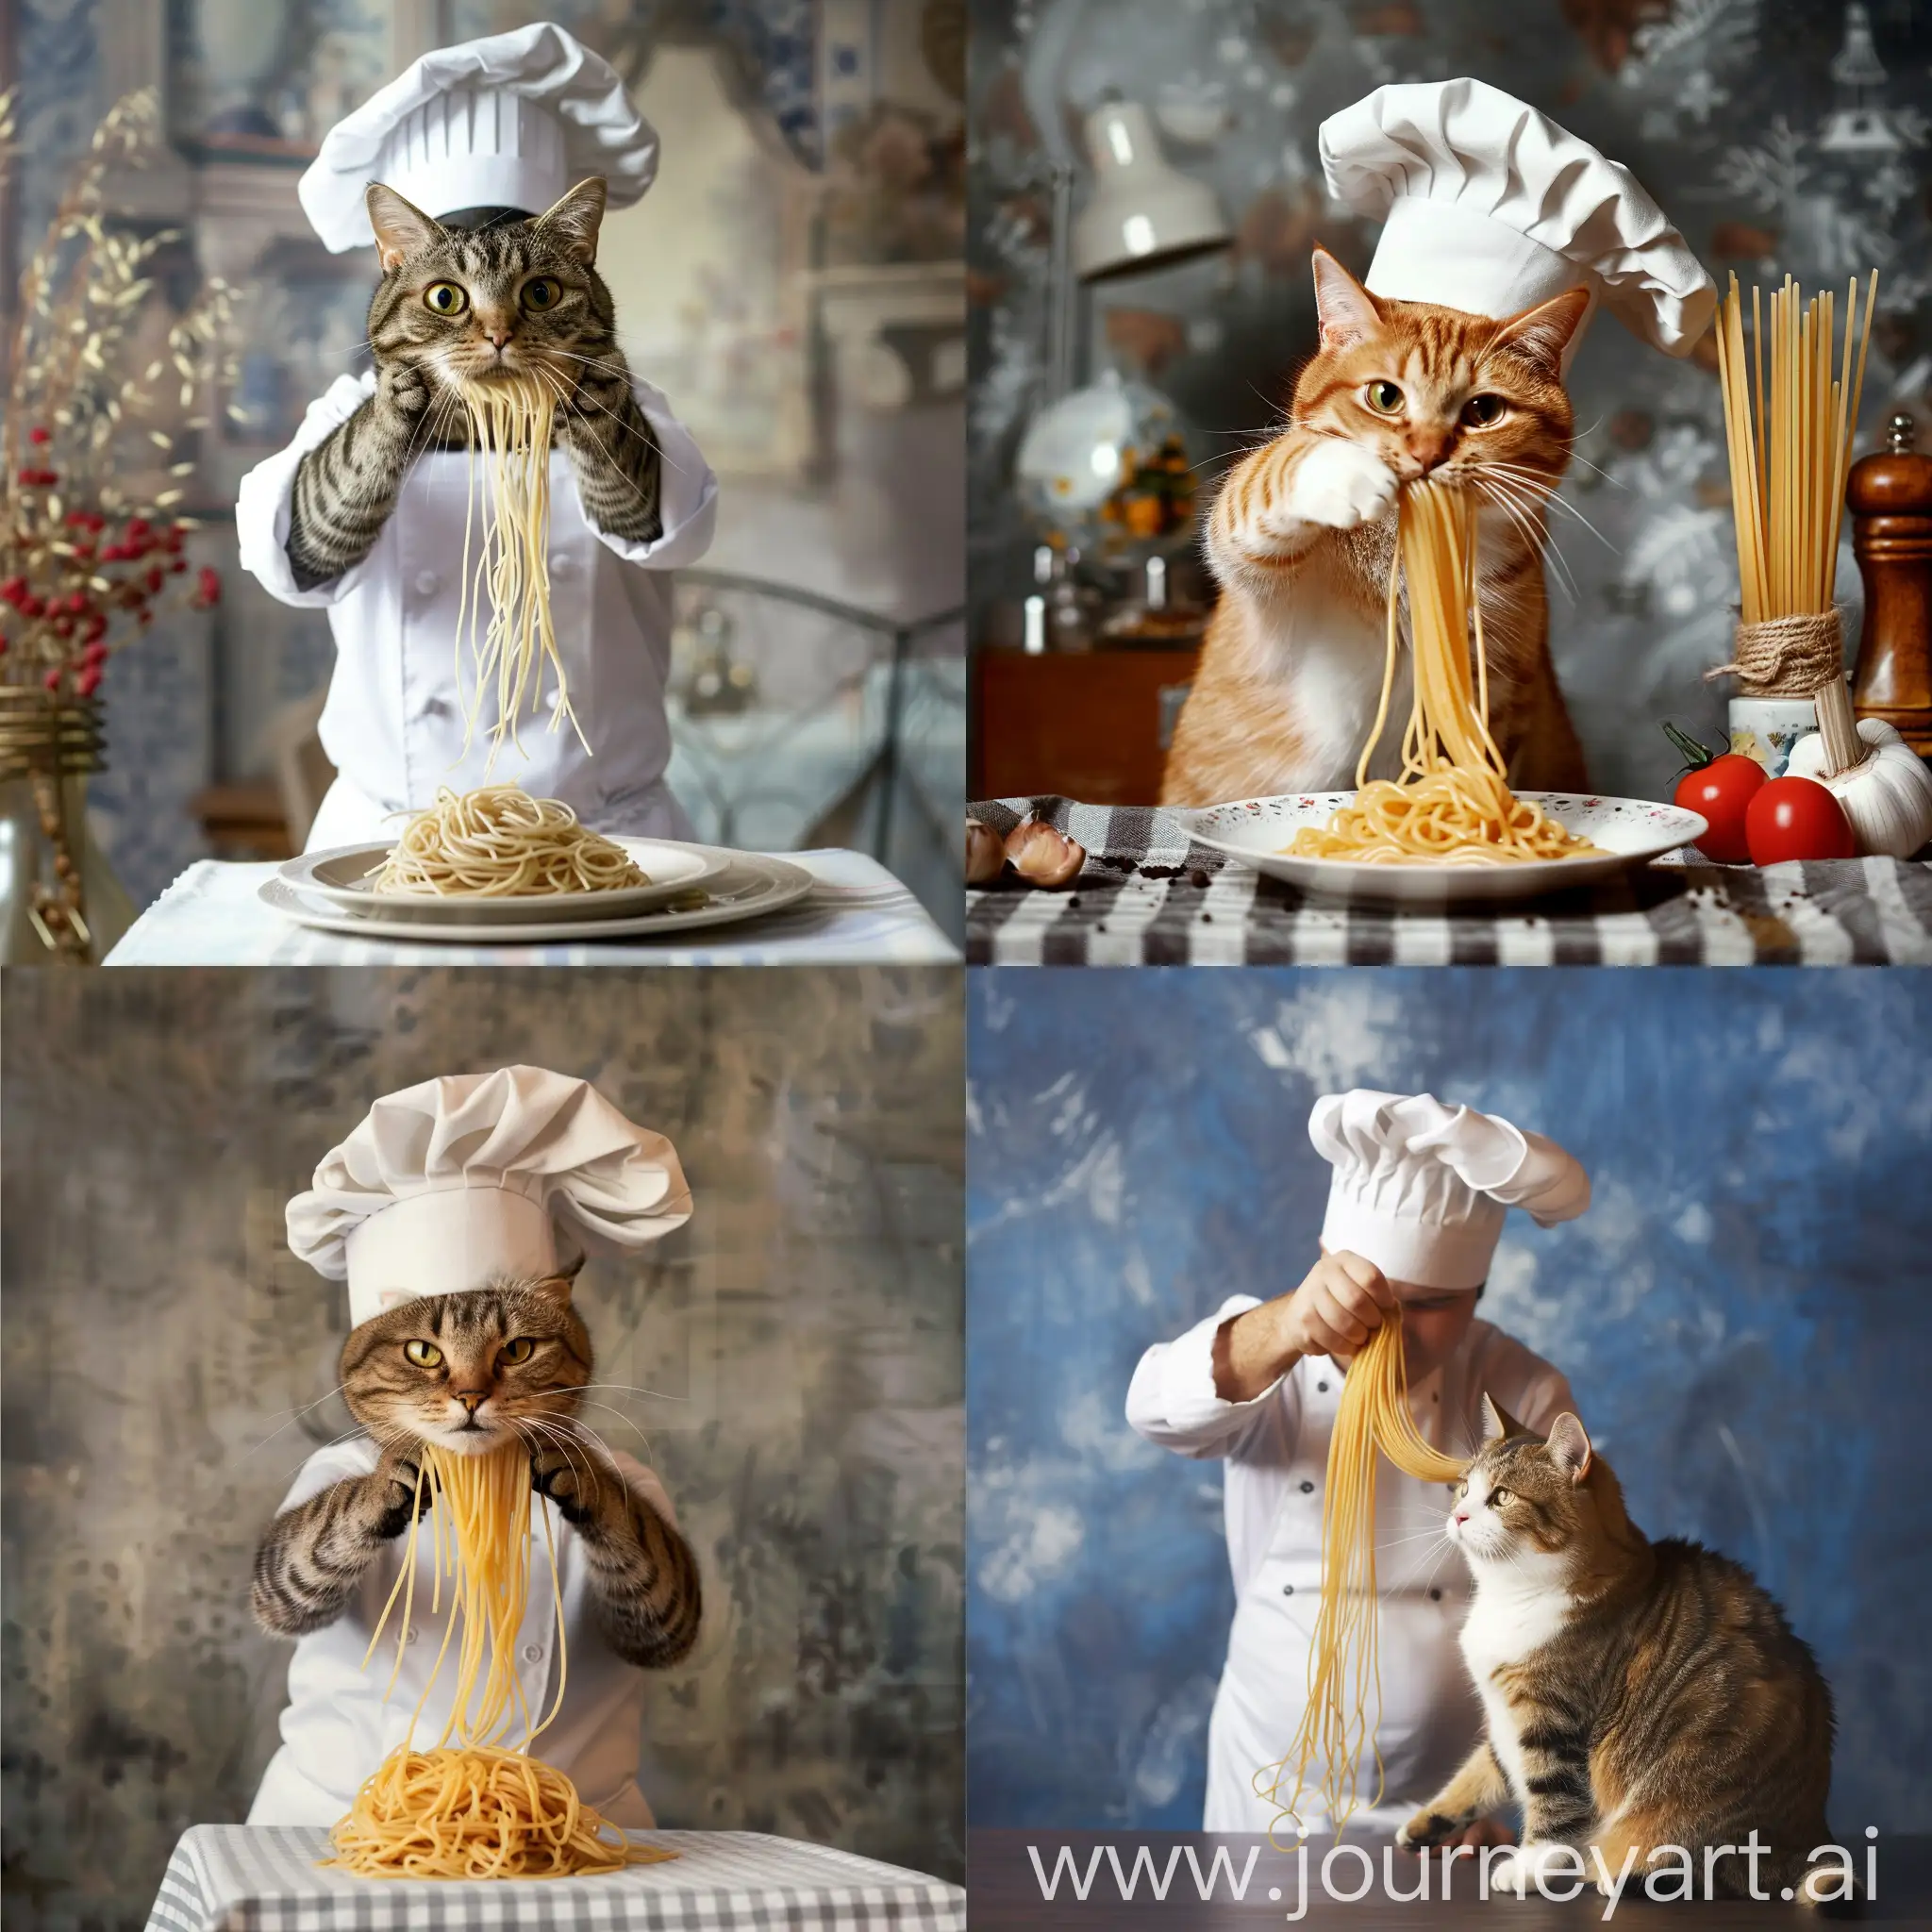 Chef-Cat-Cooking-Delicious-Spaghetti-Noodles